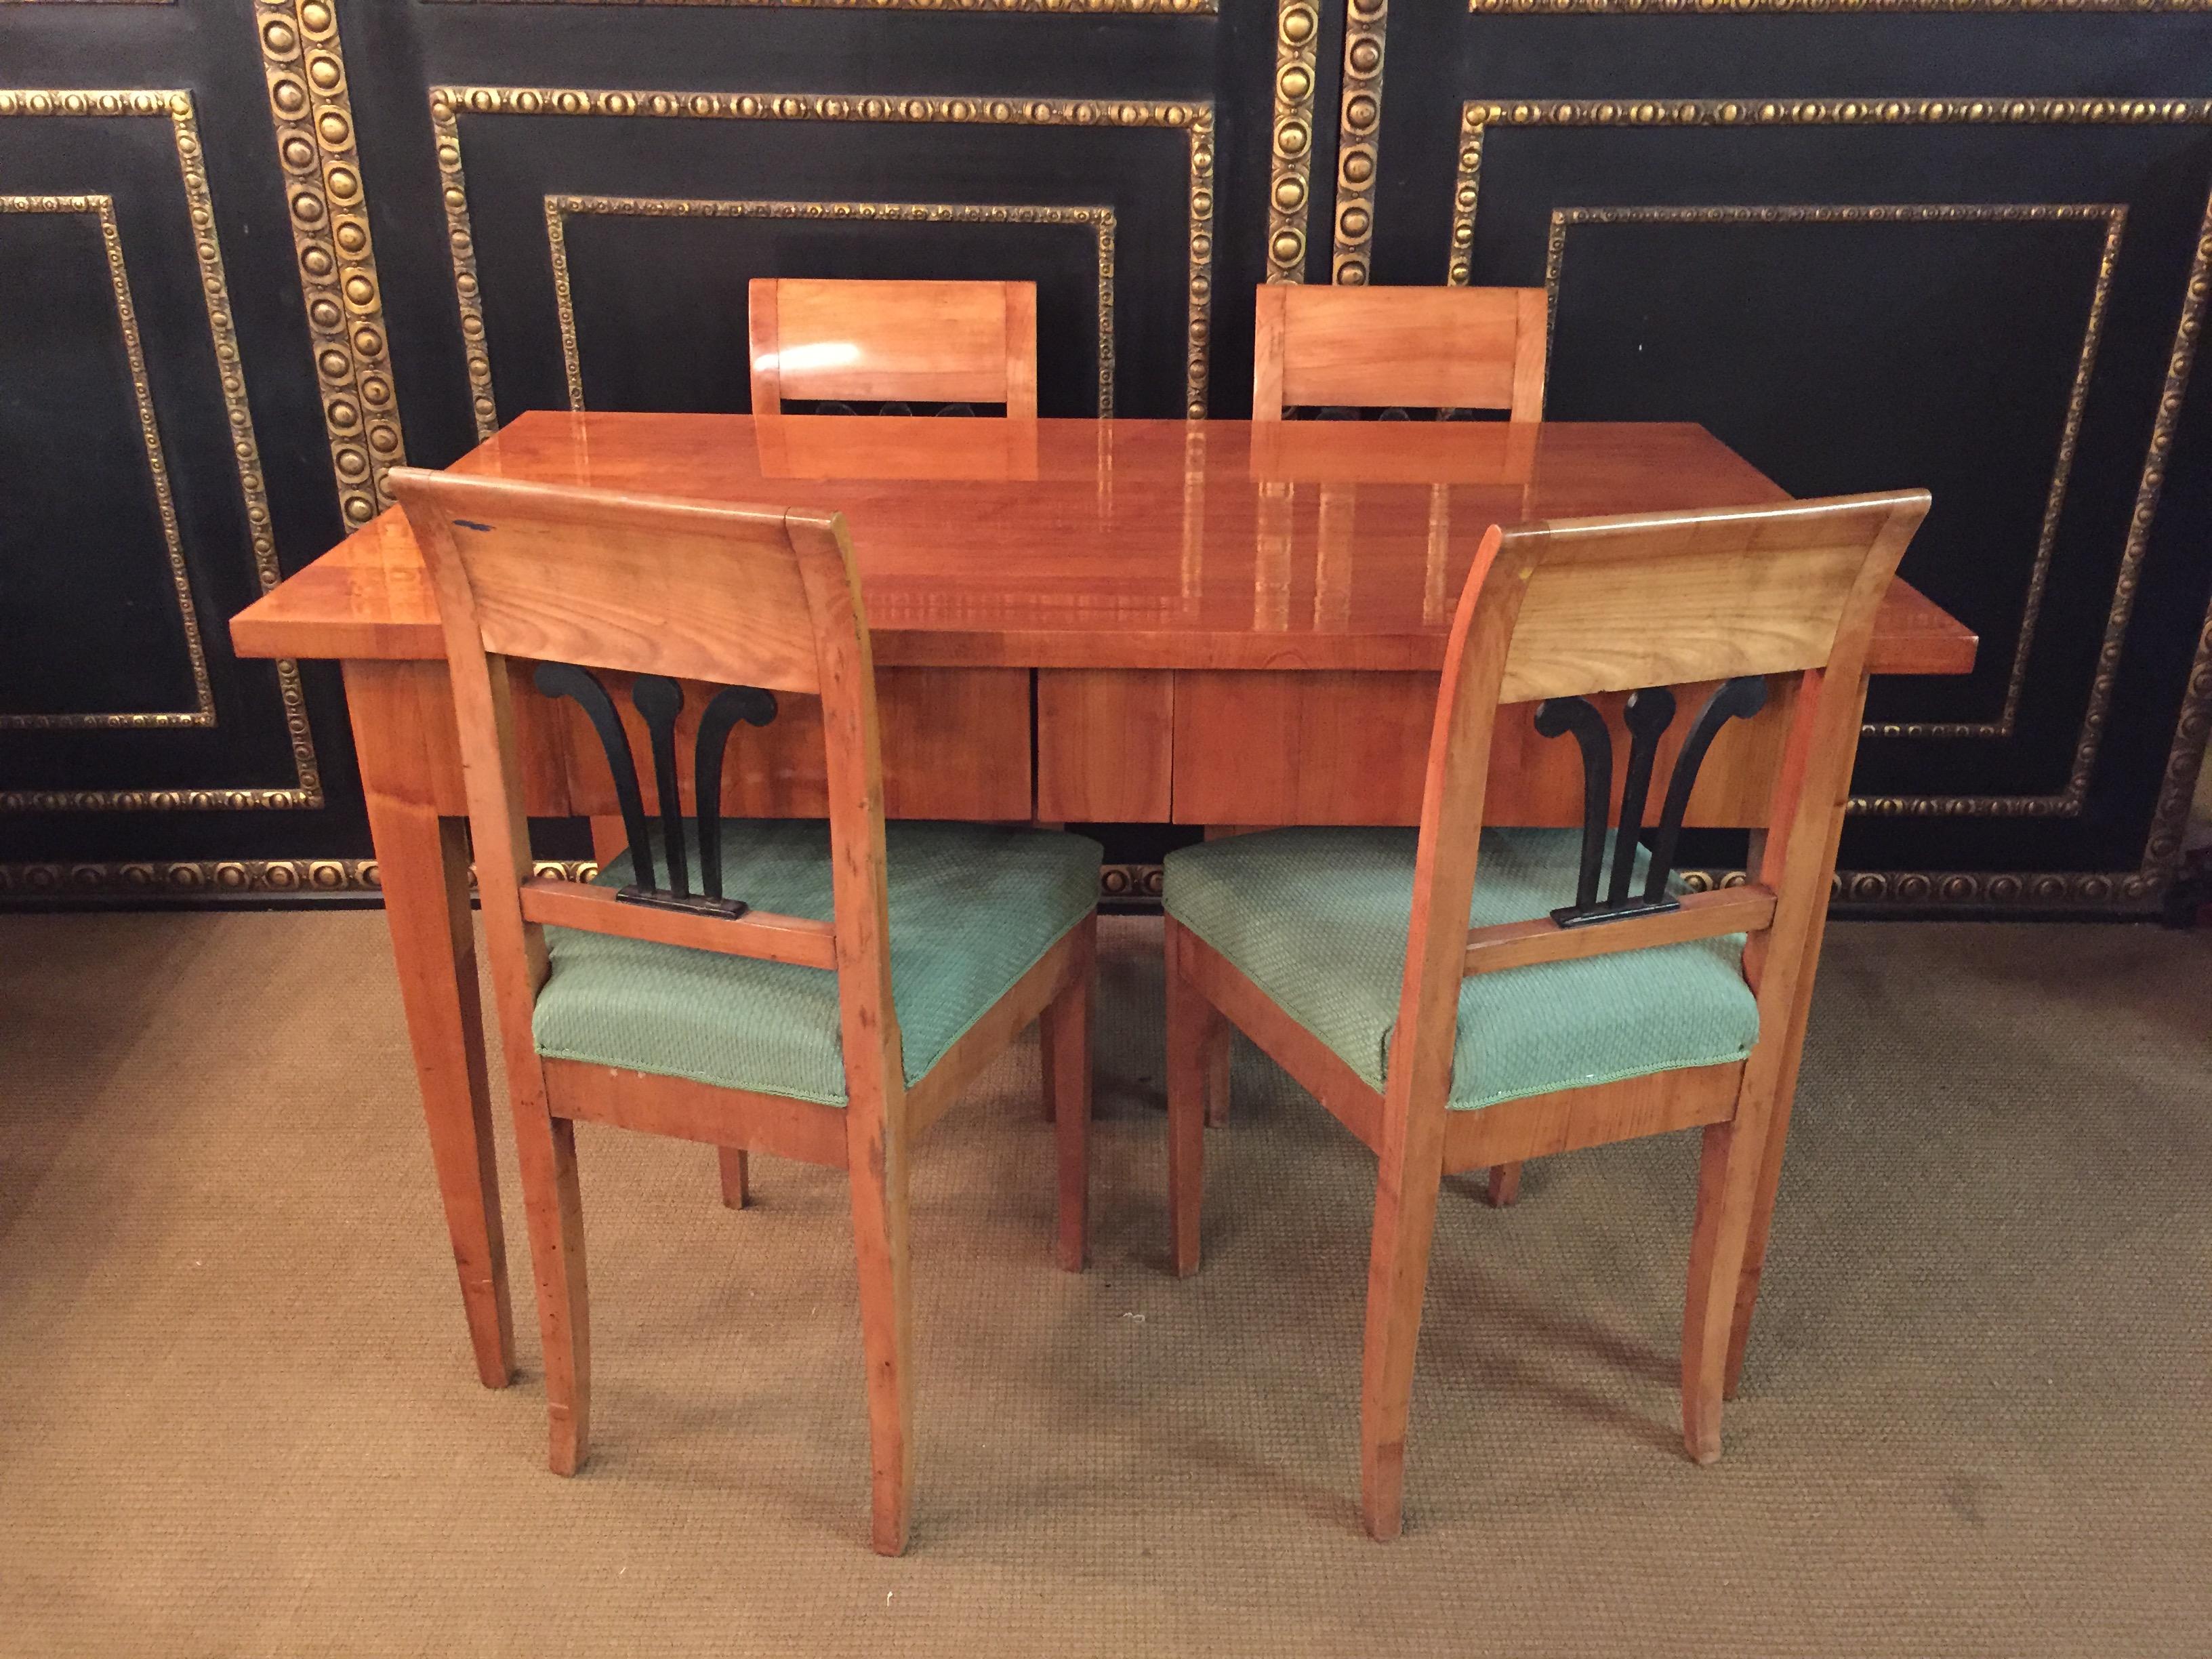 Original Biedermeier dining table with 4 chairs 19th century. 
It is made of cherrywood. With shellac hand polish.
the table legs are solid cherrywood. A wonderful timeless design, dates back to the time of Biedermeier, circa 1820. The drawer is, as